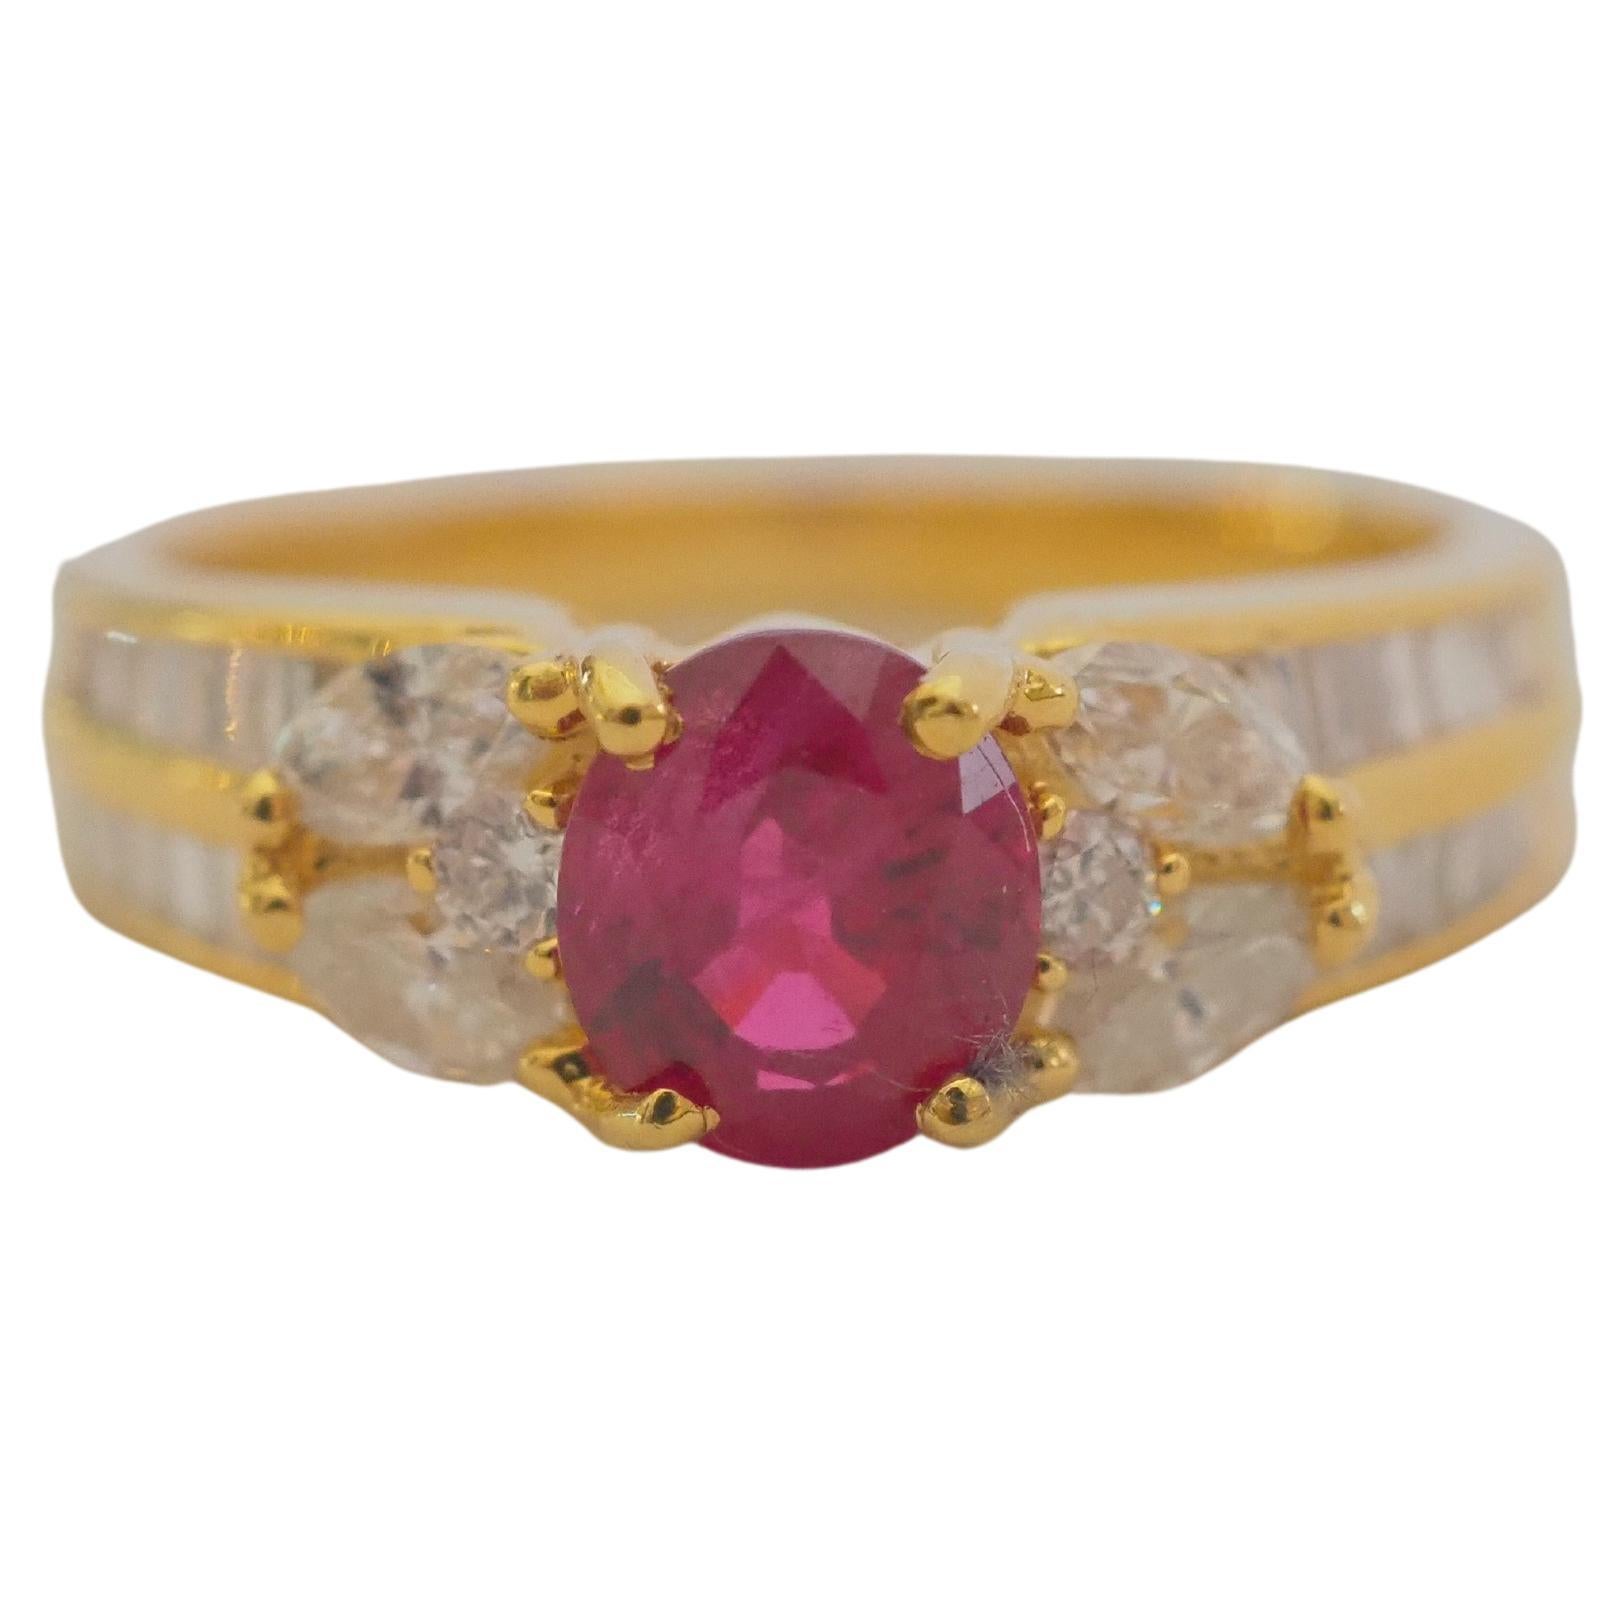 18K Gold 1.14ct Burma Ruby &0.58ct Assorted Diamonds Cocktail Ring